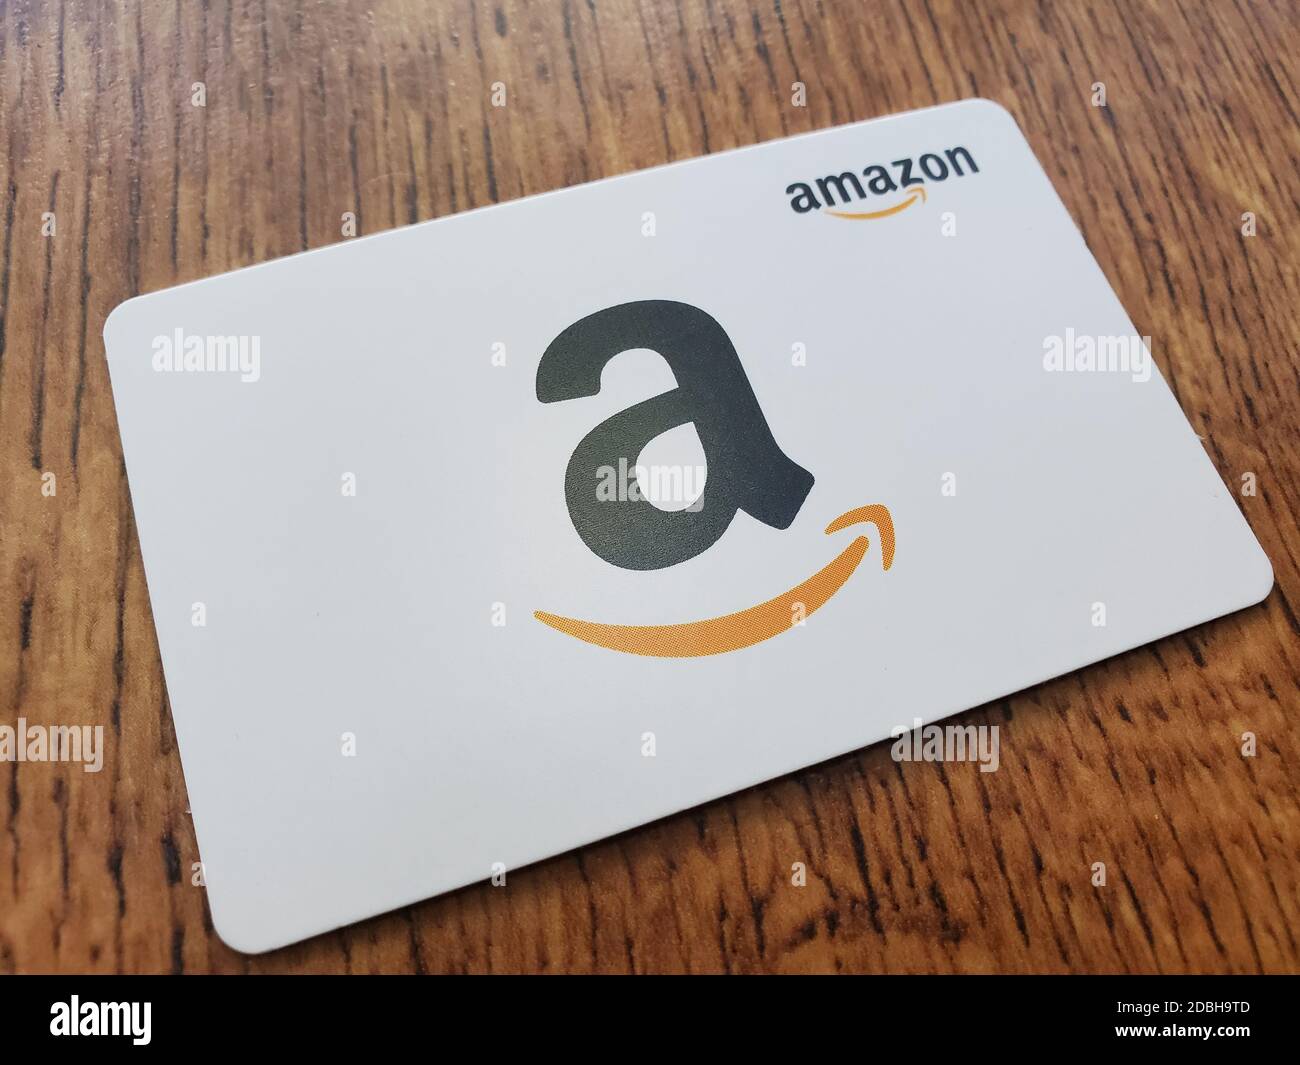 How to redeem Amazon Gift Cards - YouTube